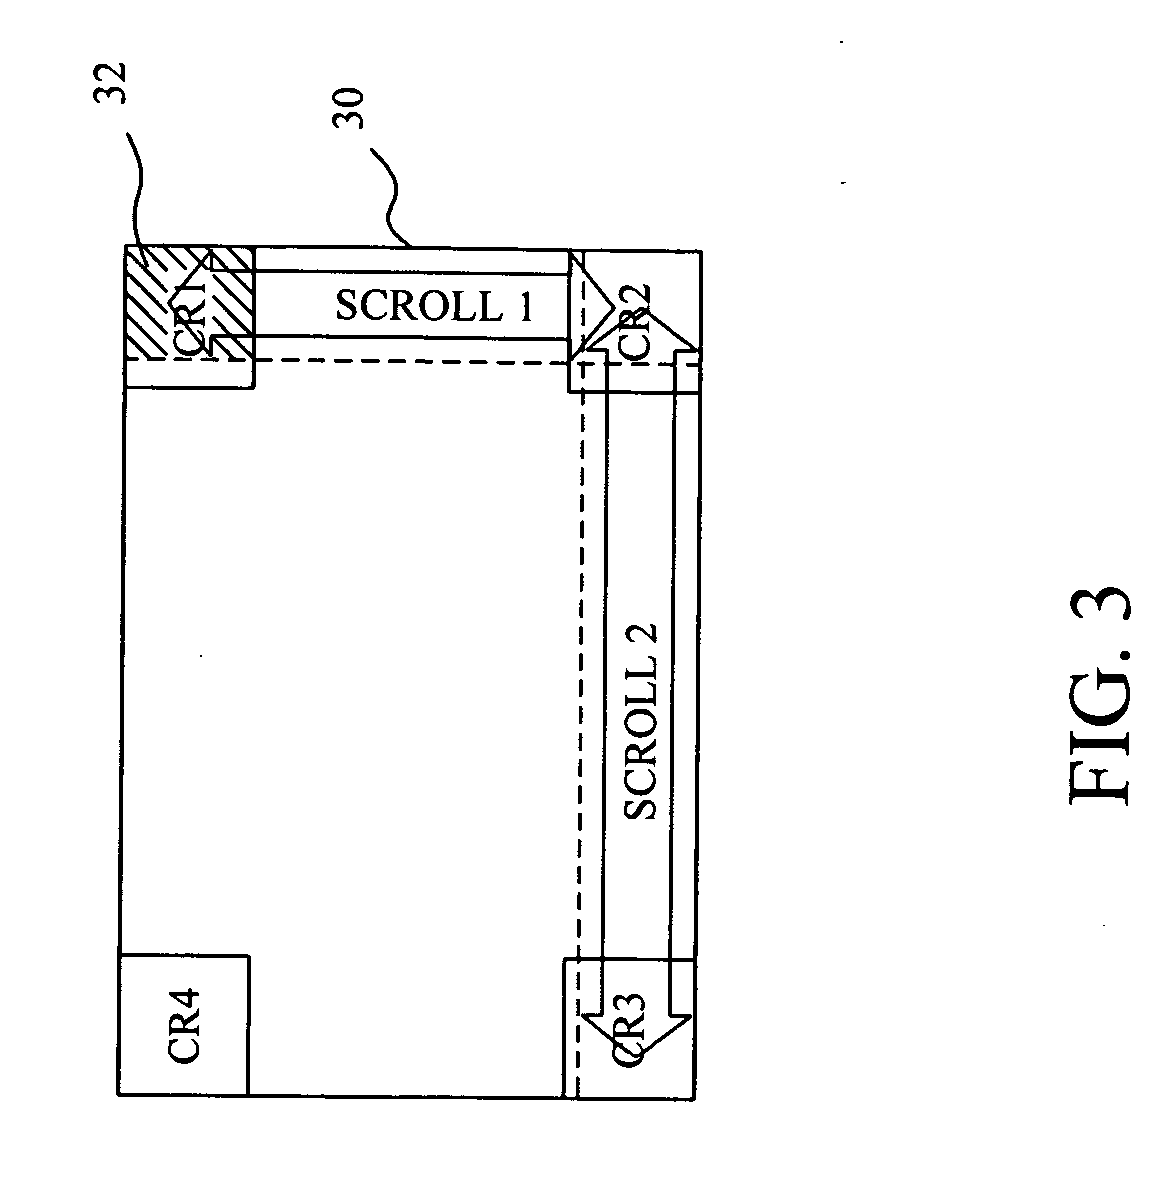 Method for detecting overlapped function area on a touchpad